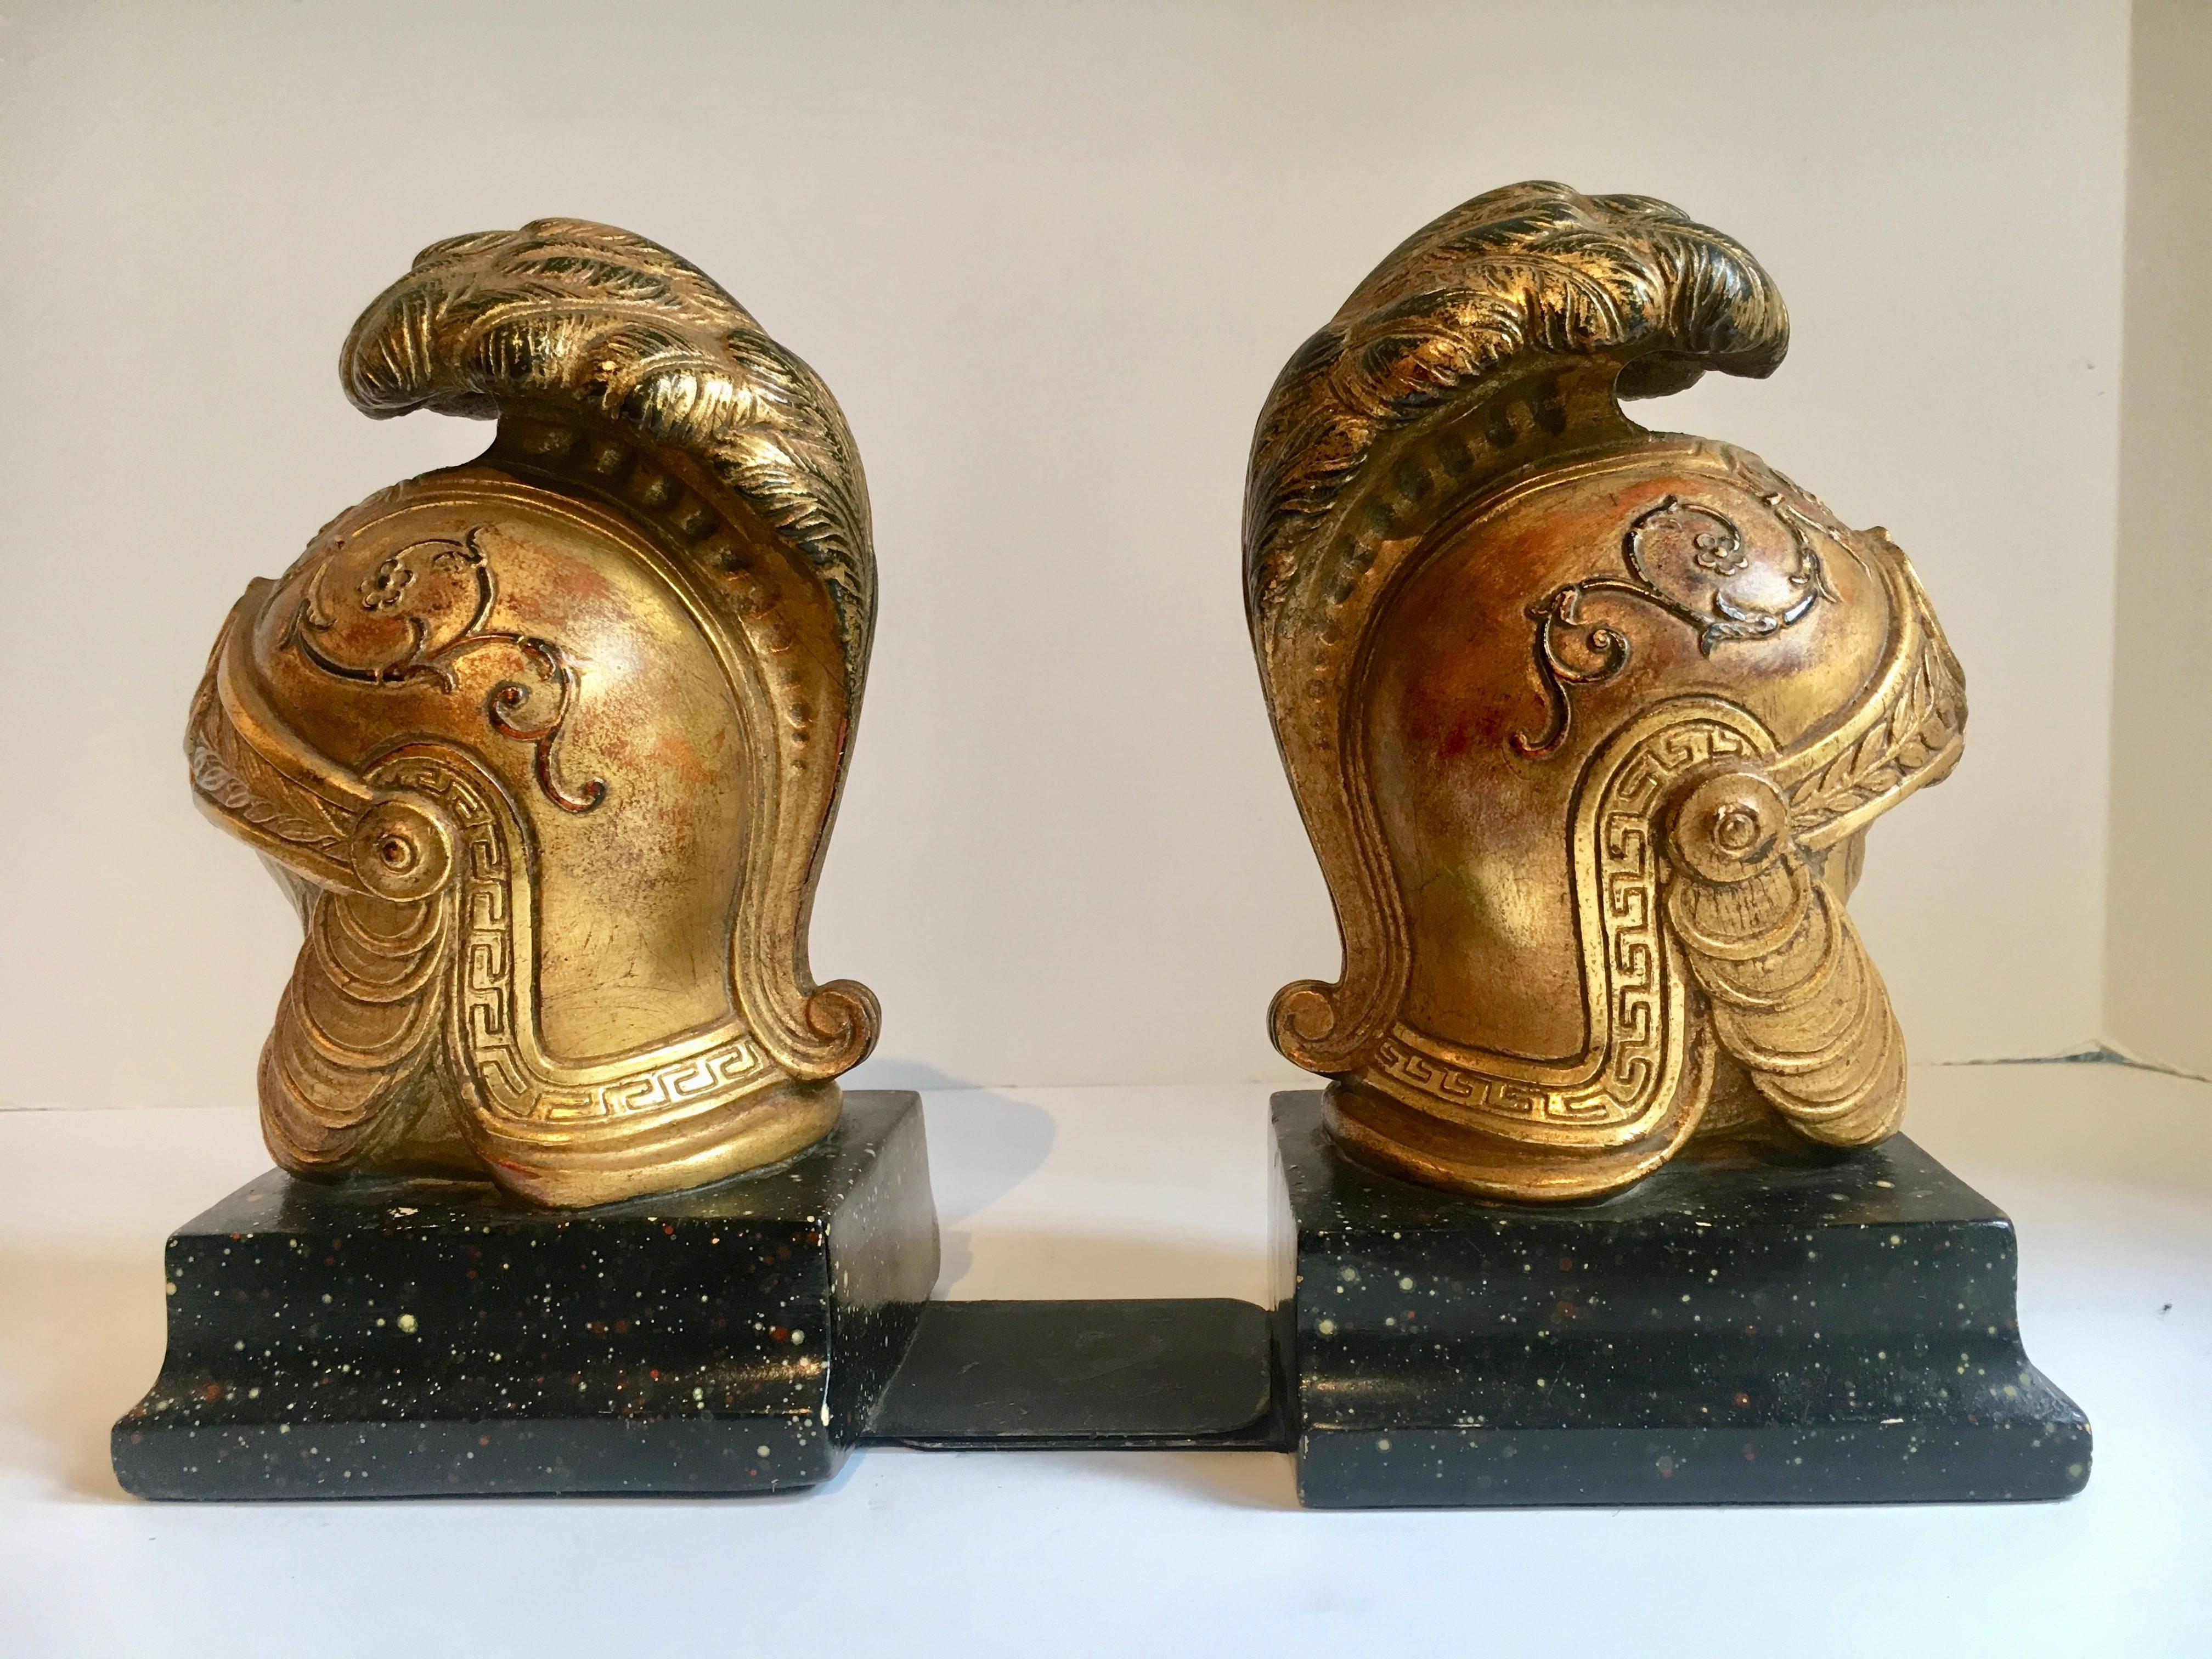 Pair of gilt Borghese gilt roman helmet bookends - perfect for any room.